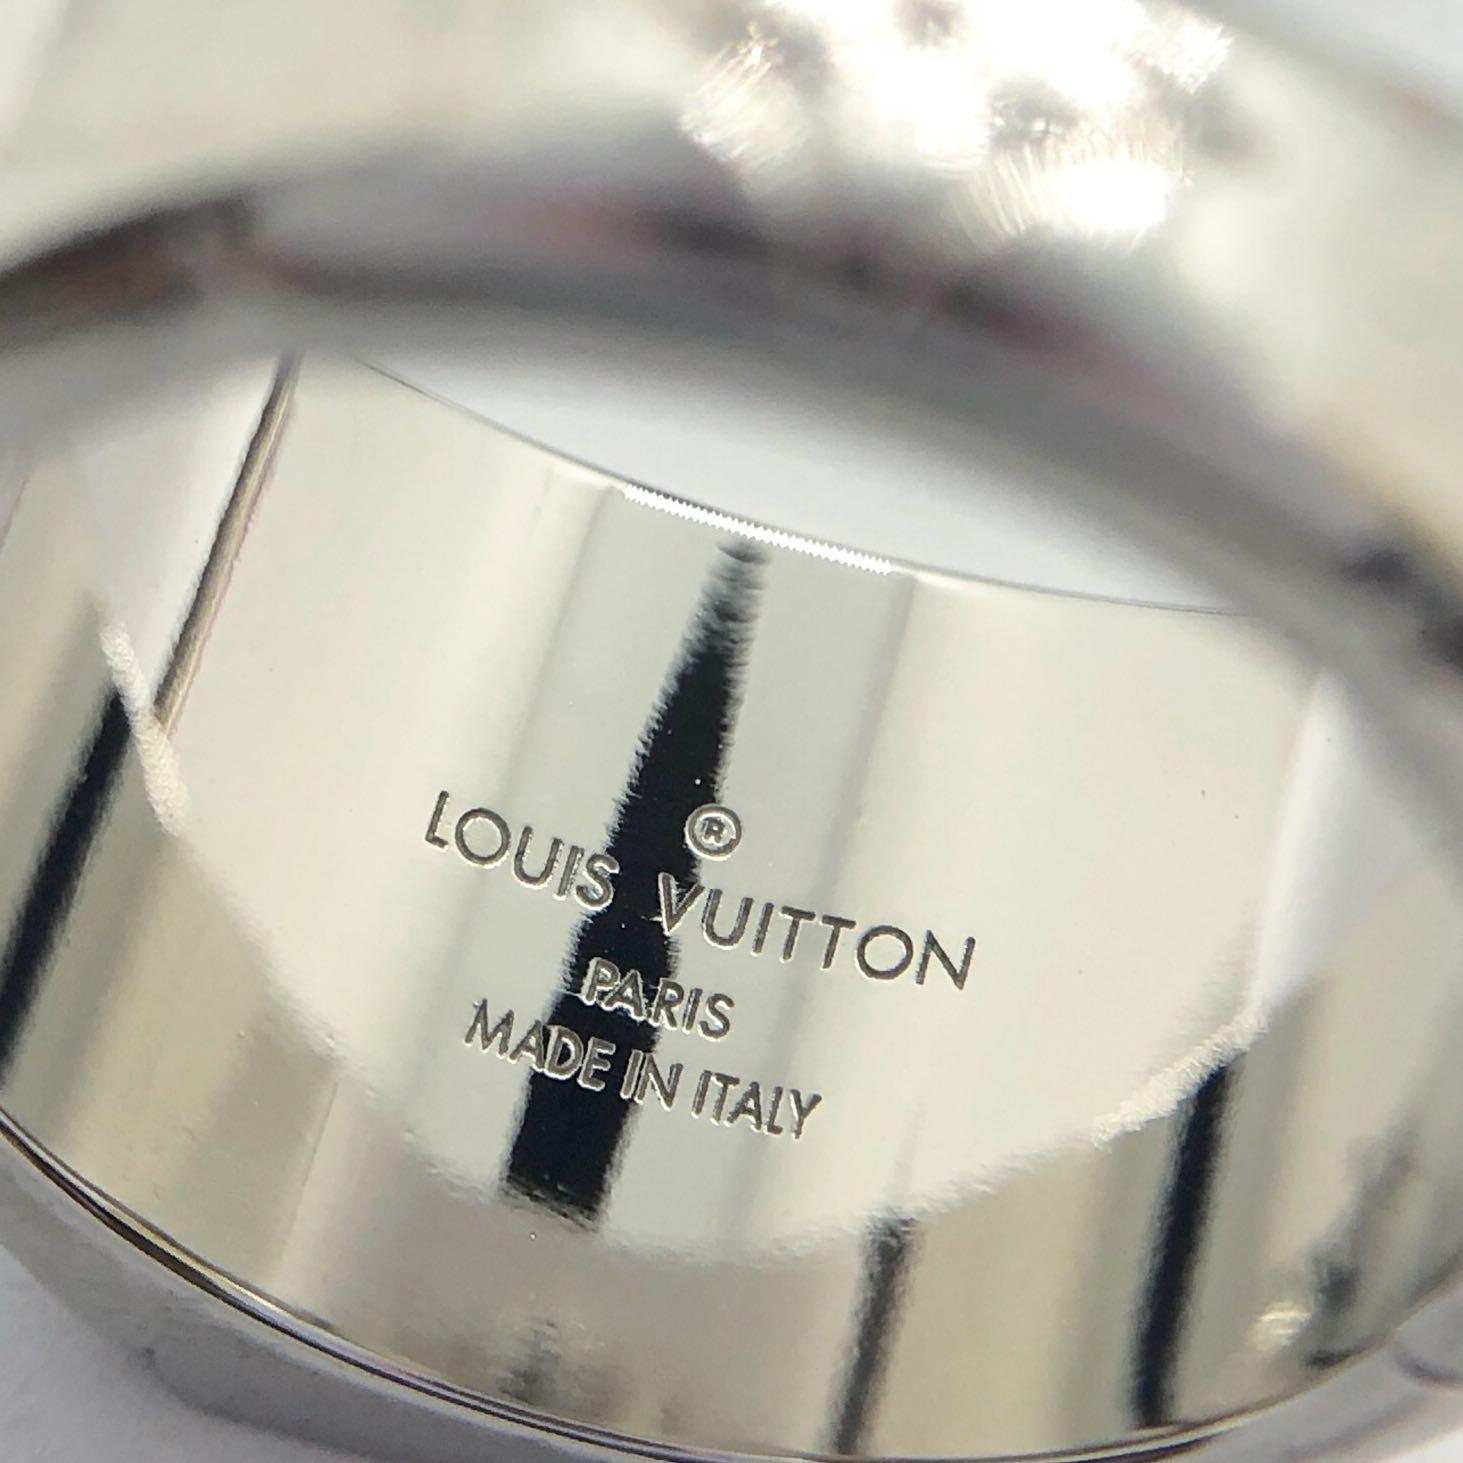 Buy [Used] LOUIS VUITTON signet ring ring LV logo monogram flower silver  plated GP M62487 size M from Japan - Buy authentic Plus exclusive items  from Japan